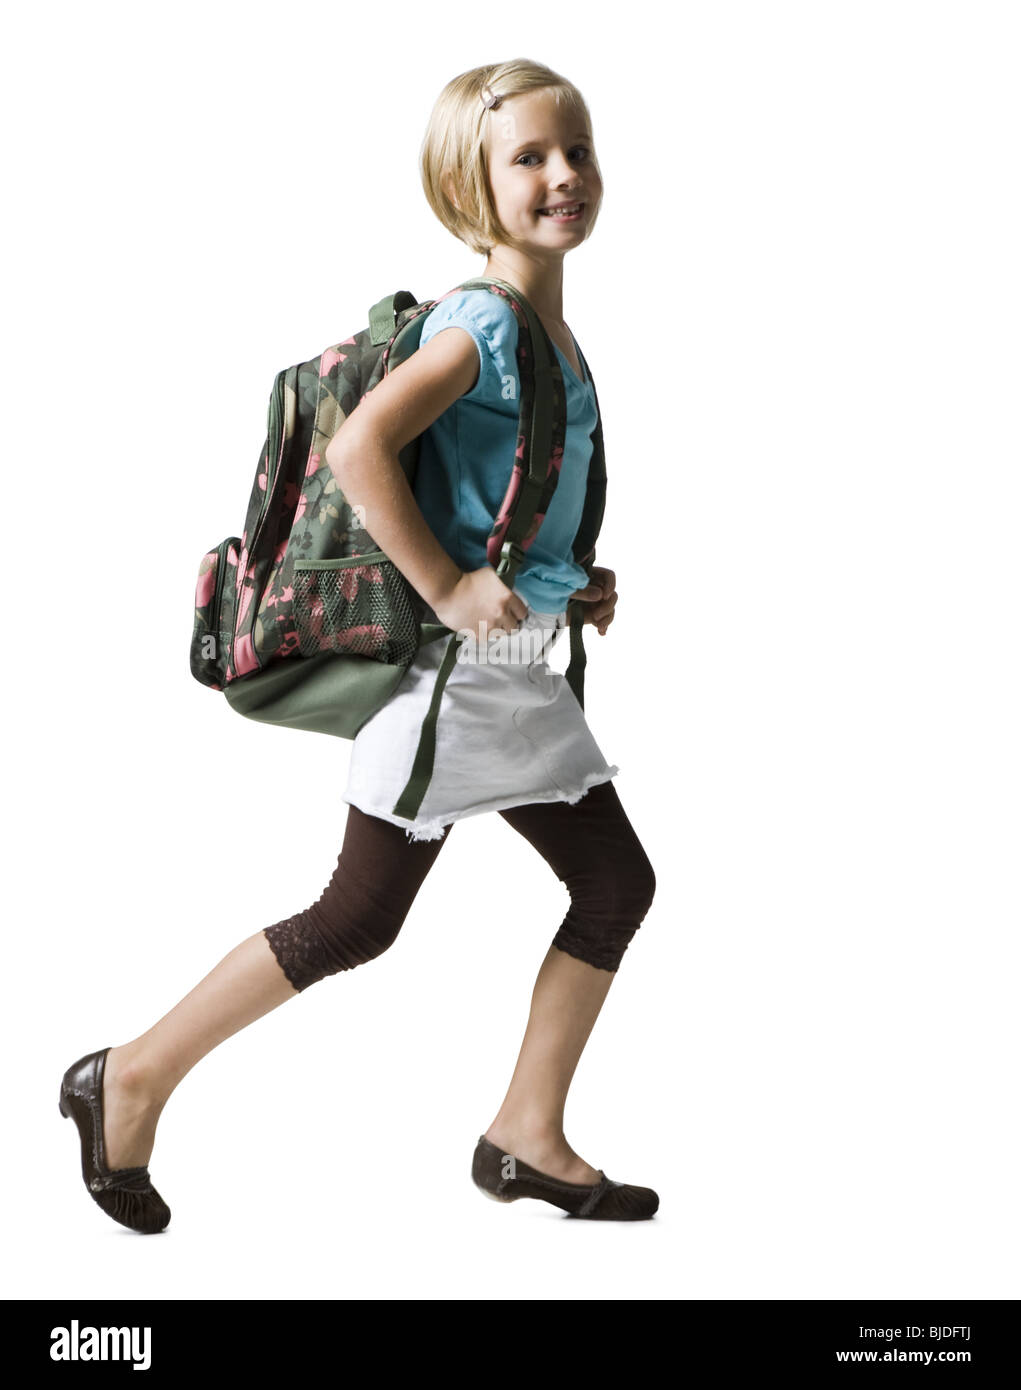 girl with a backpack. Stock Photo